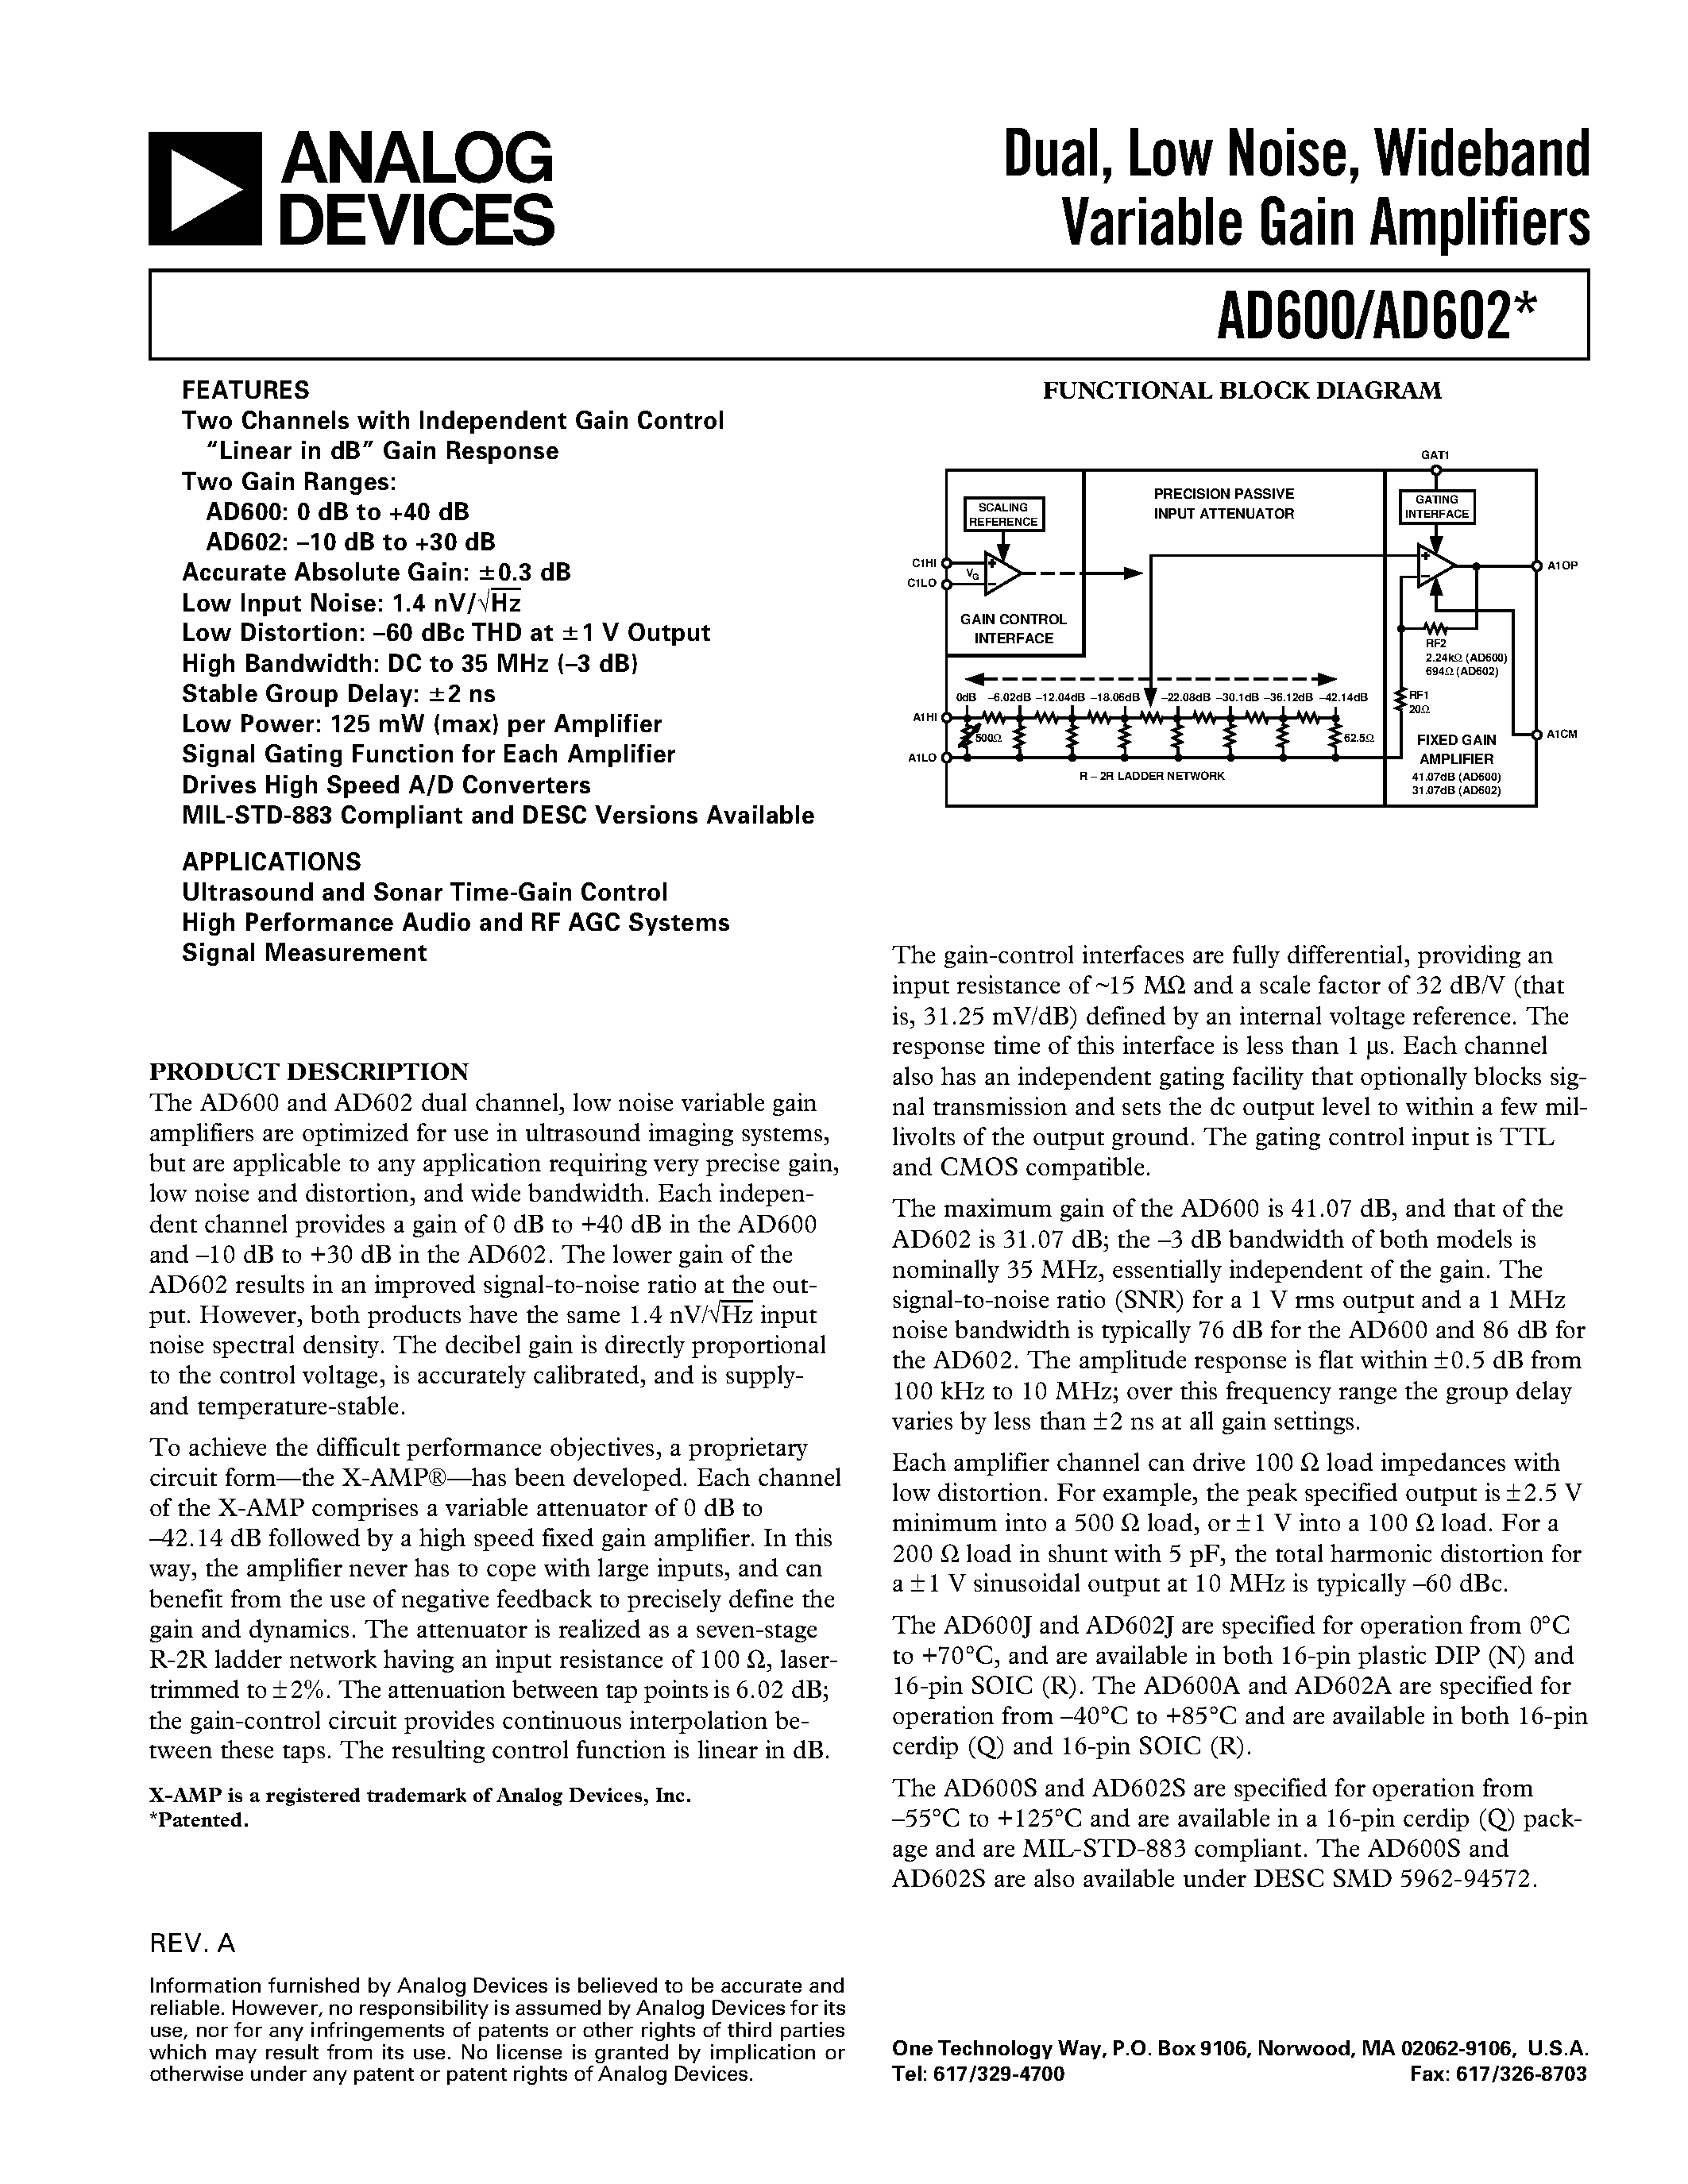 Datasheet AD600 - Dual/ Low Noise/ Wideband Variable Gain Amplifiers page 1